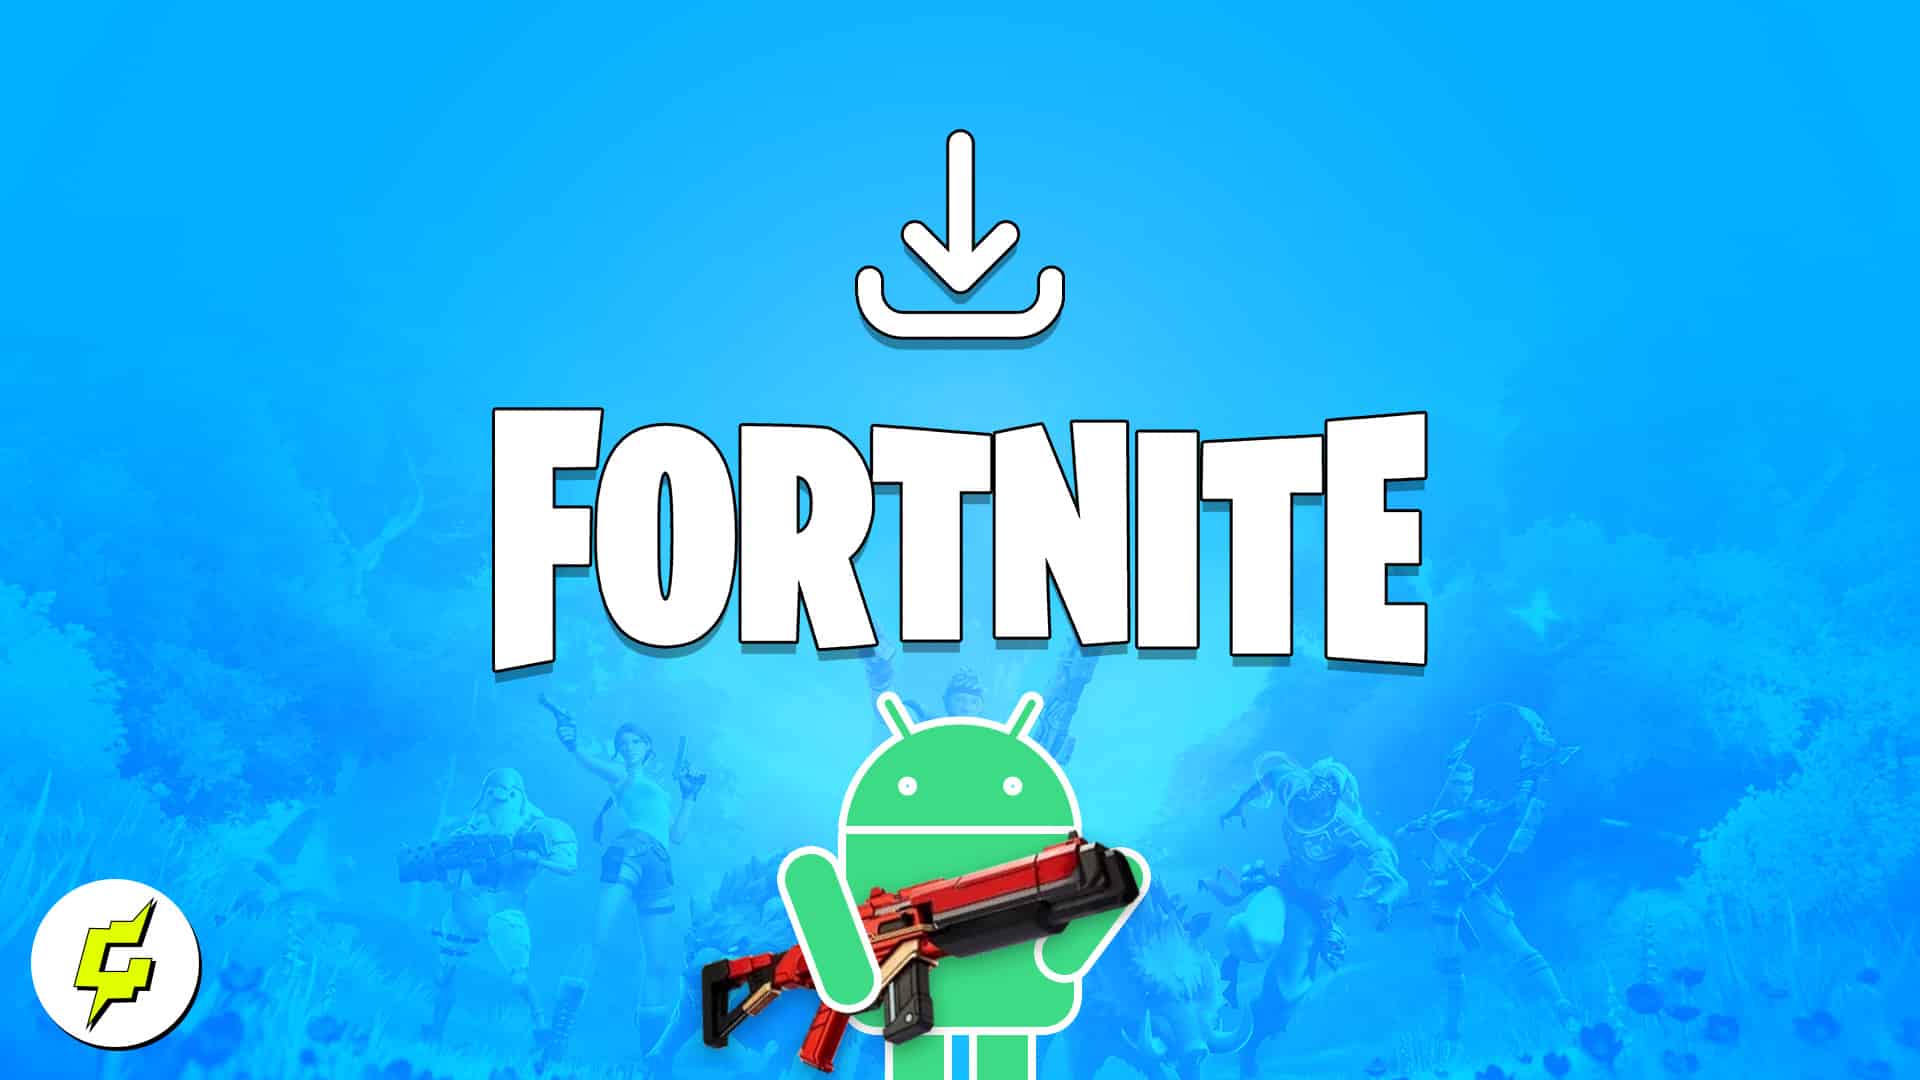 How to Download Fortnite on Android